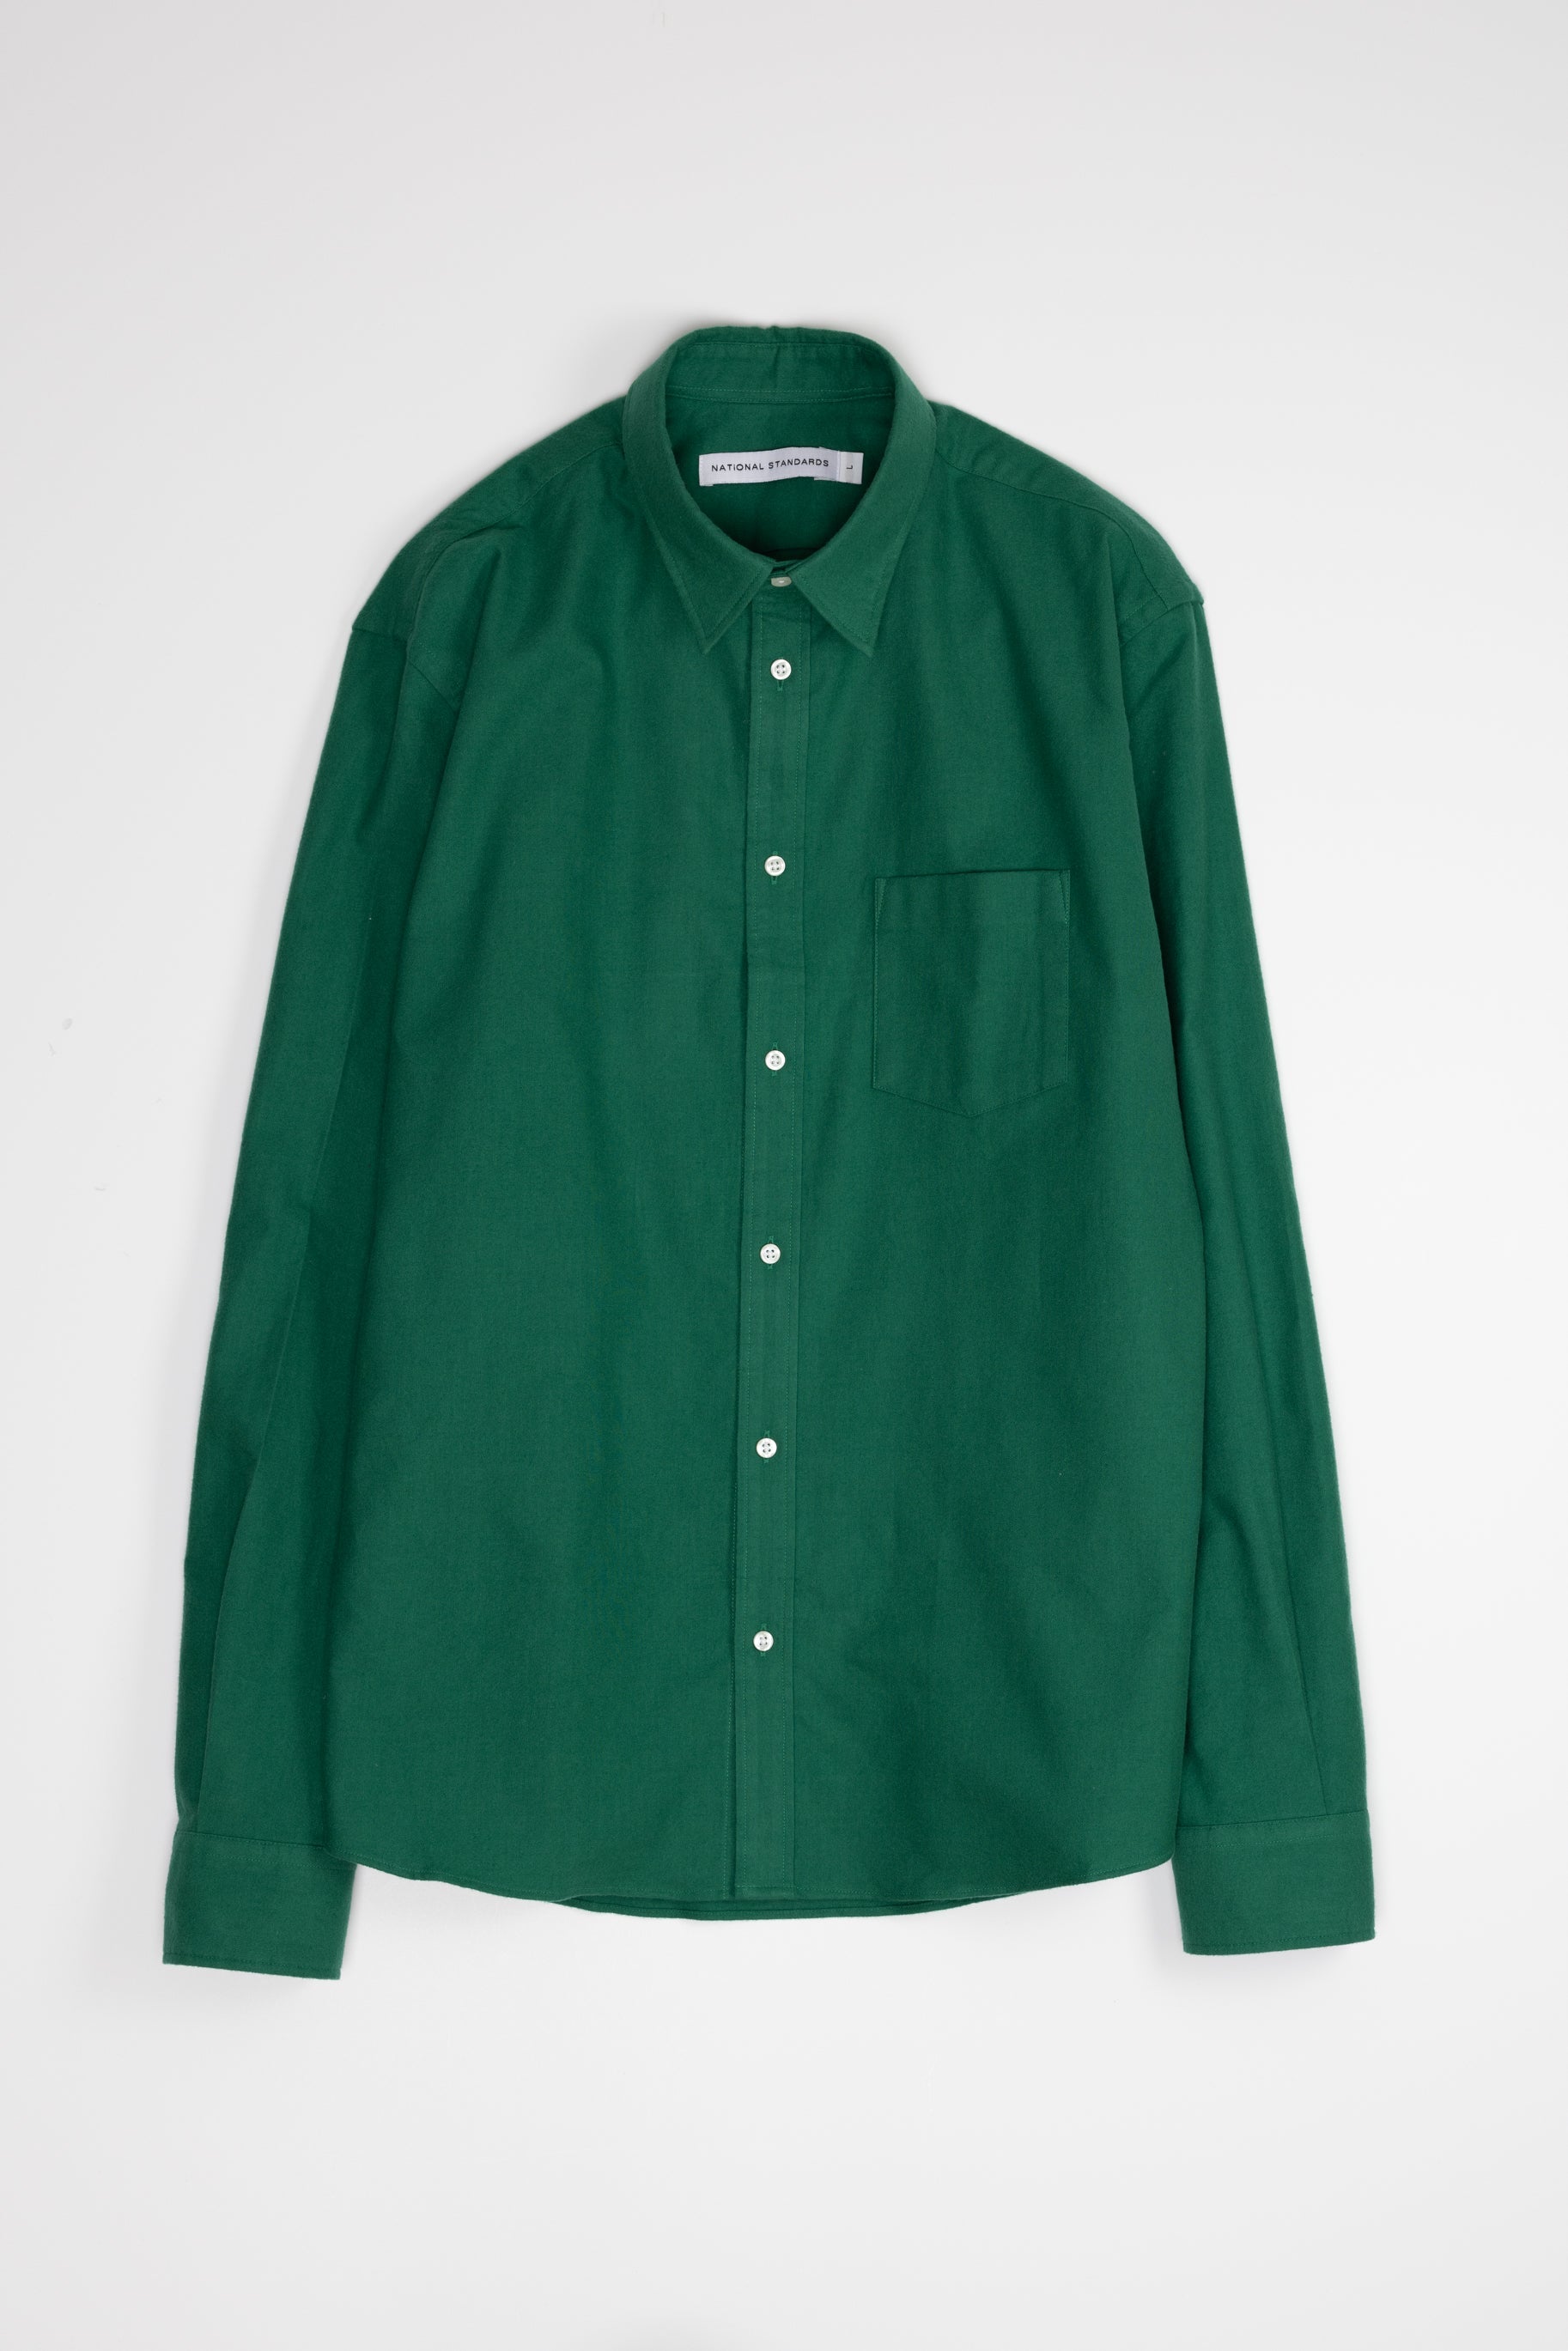 Japanese Flannel in Green 01